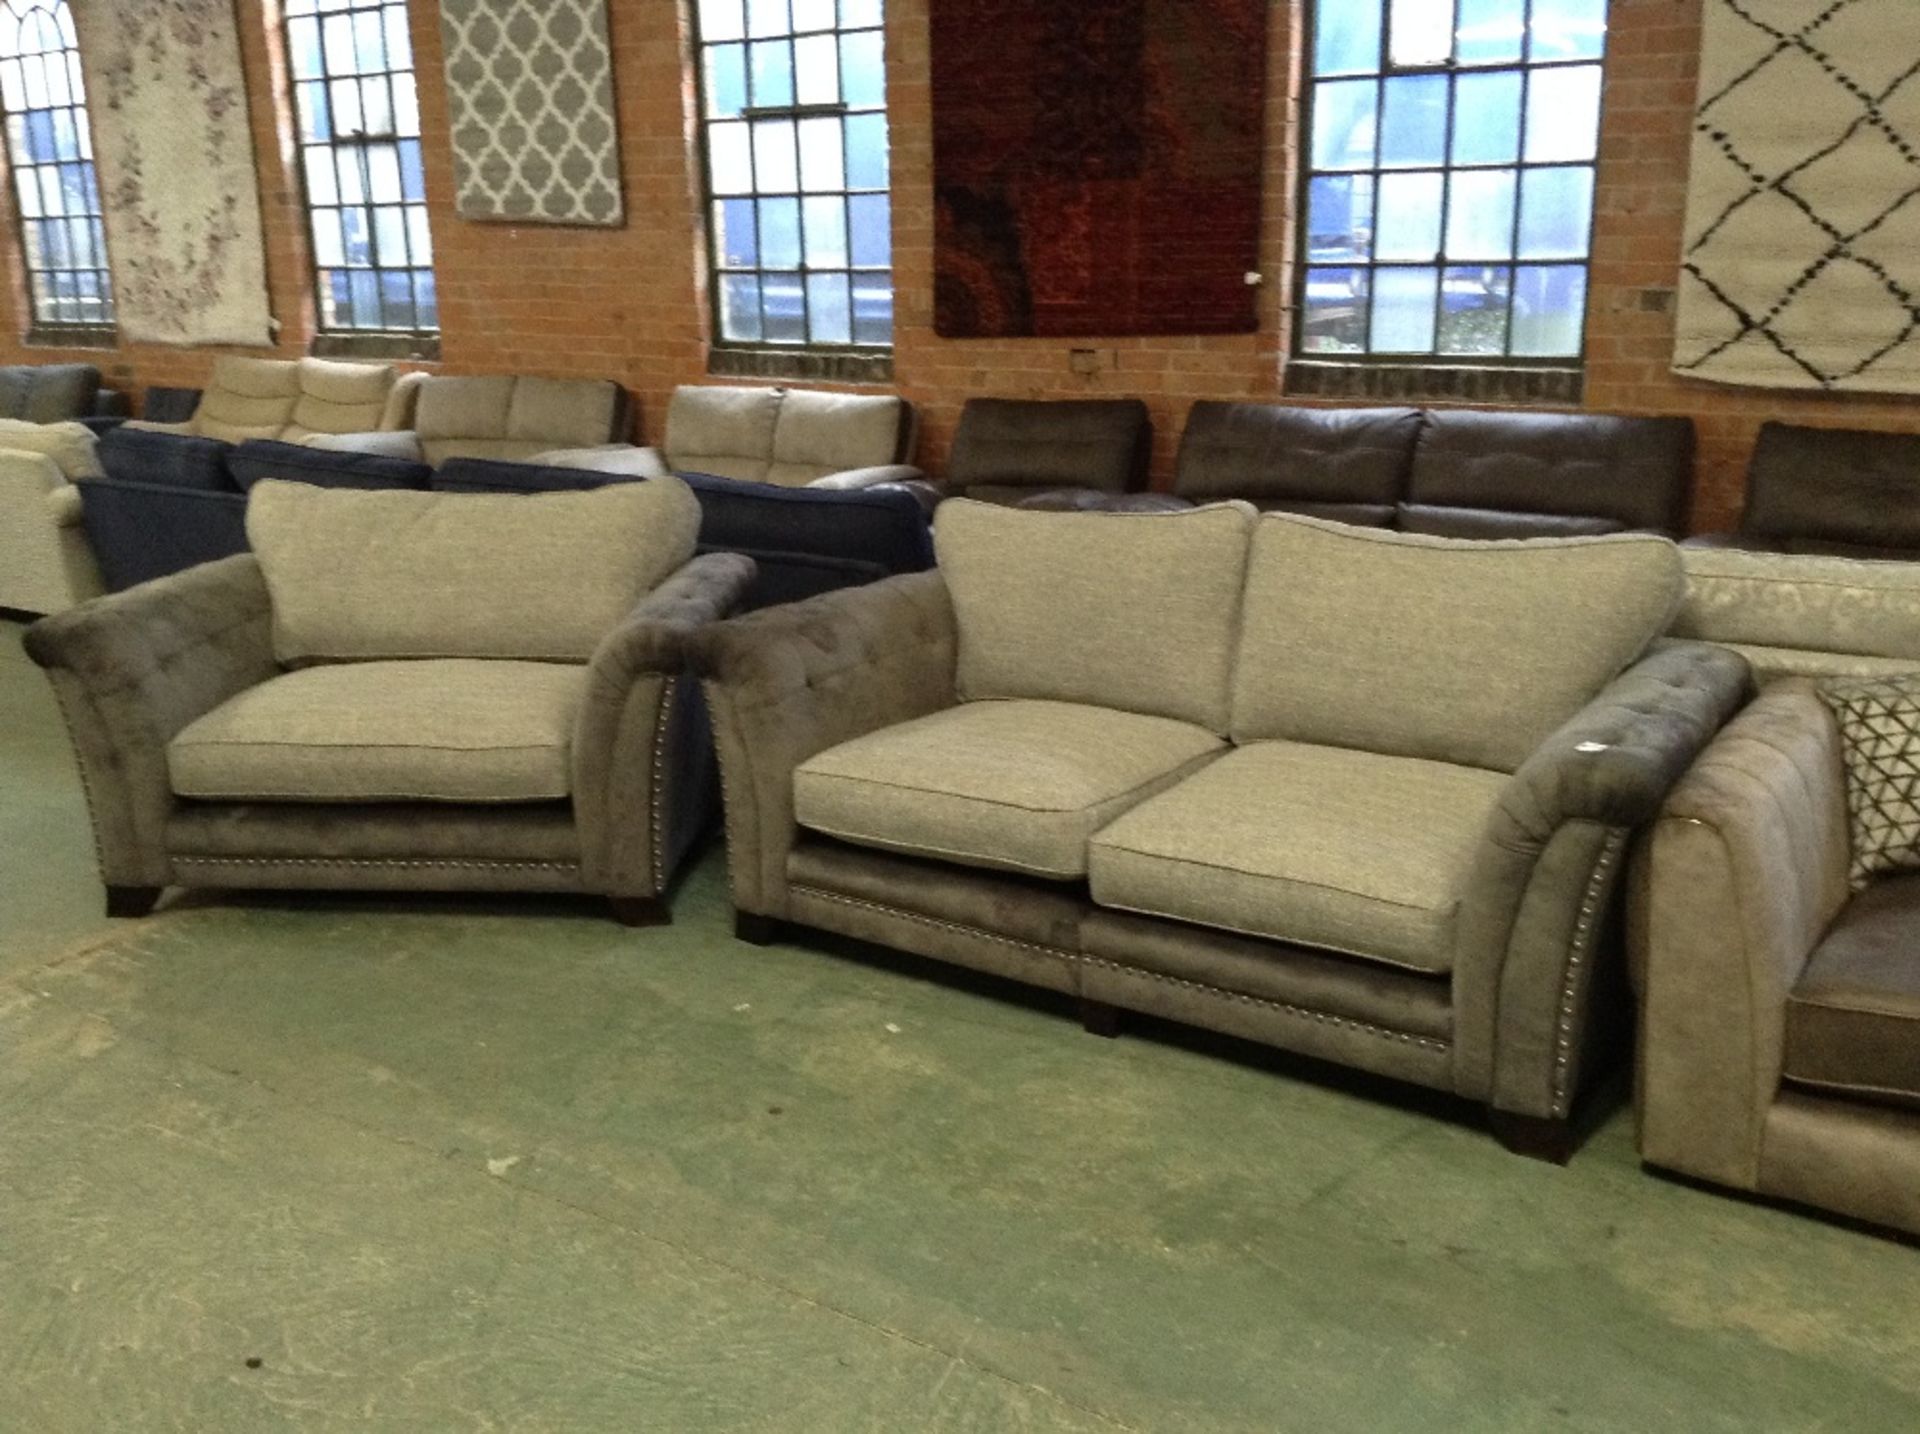 2 SEATER SOFA AND LARGE SNUG CHAIR (WM82-23-24)